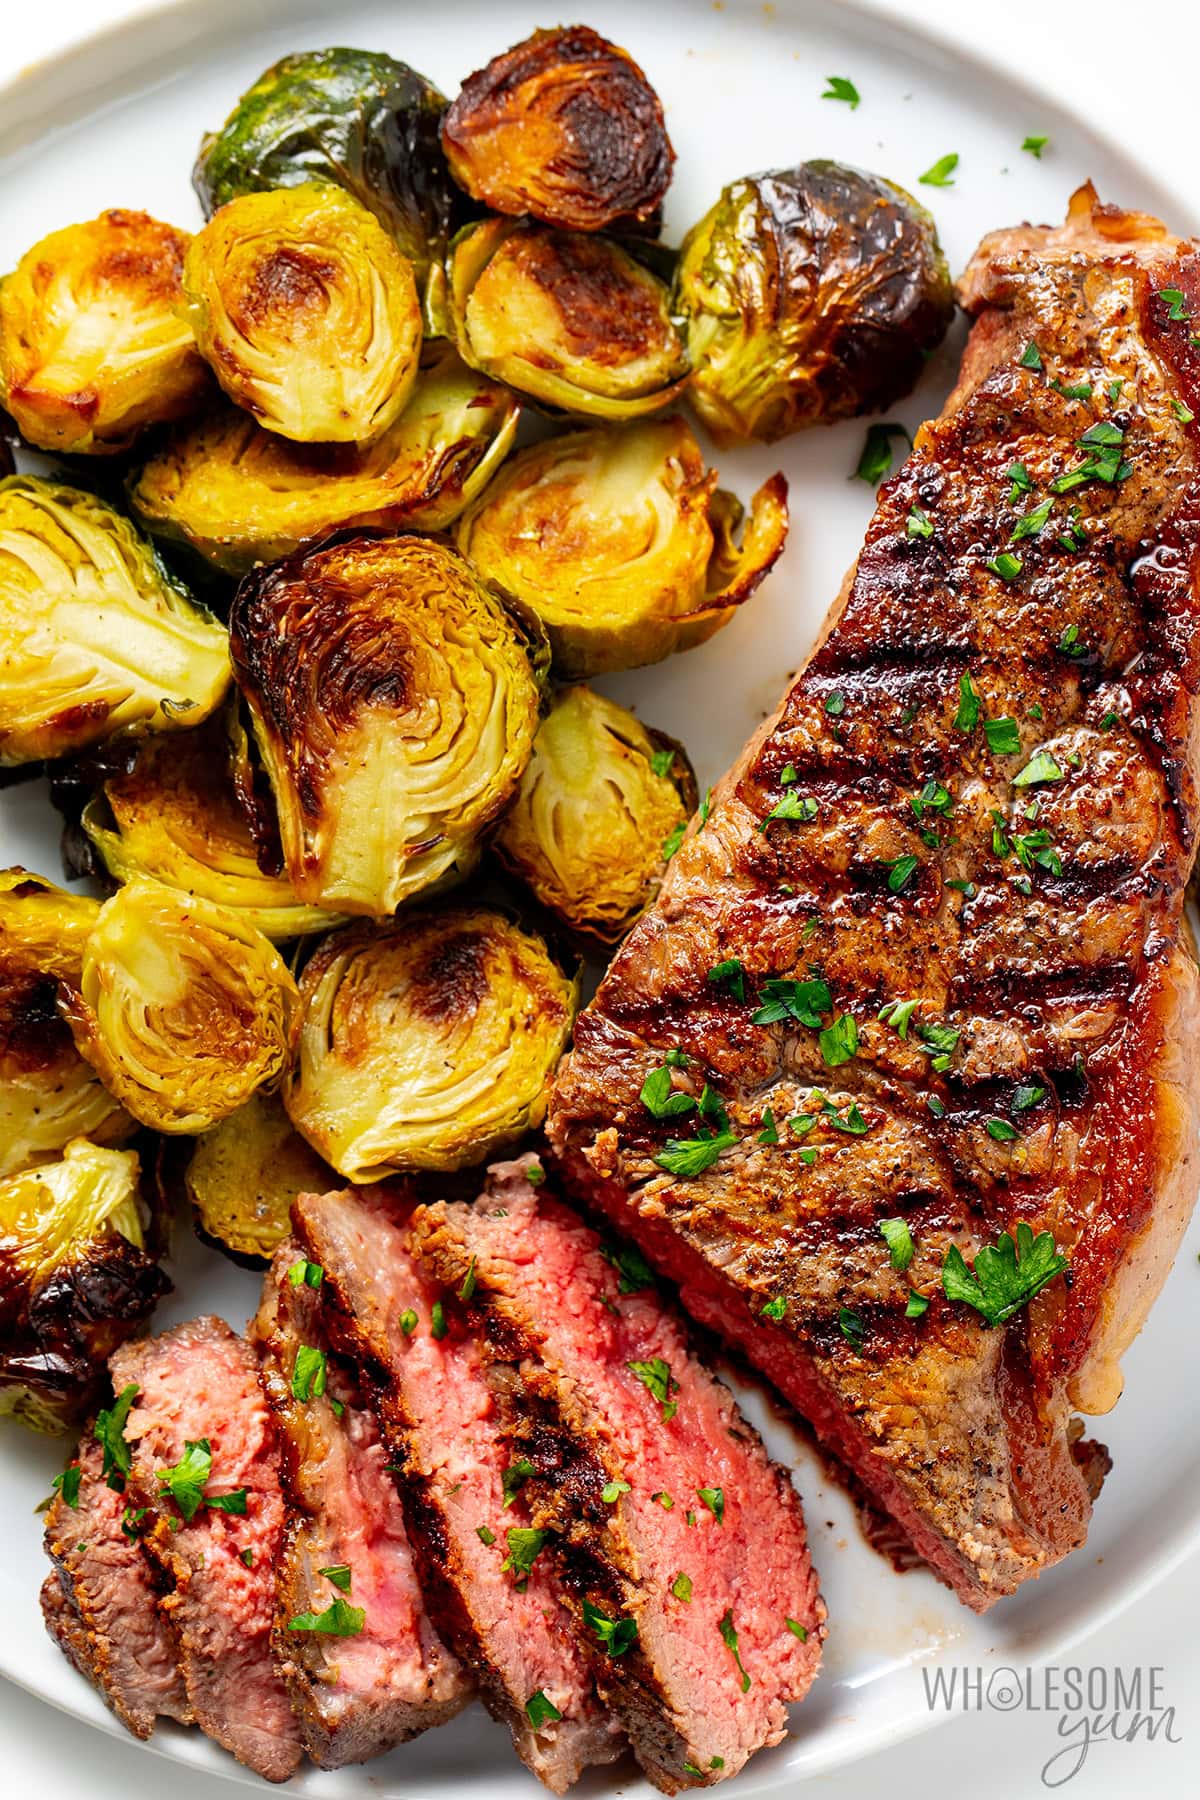 NY strip steak served with roasted brussels sprouts.